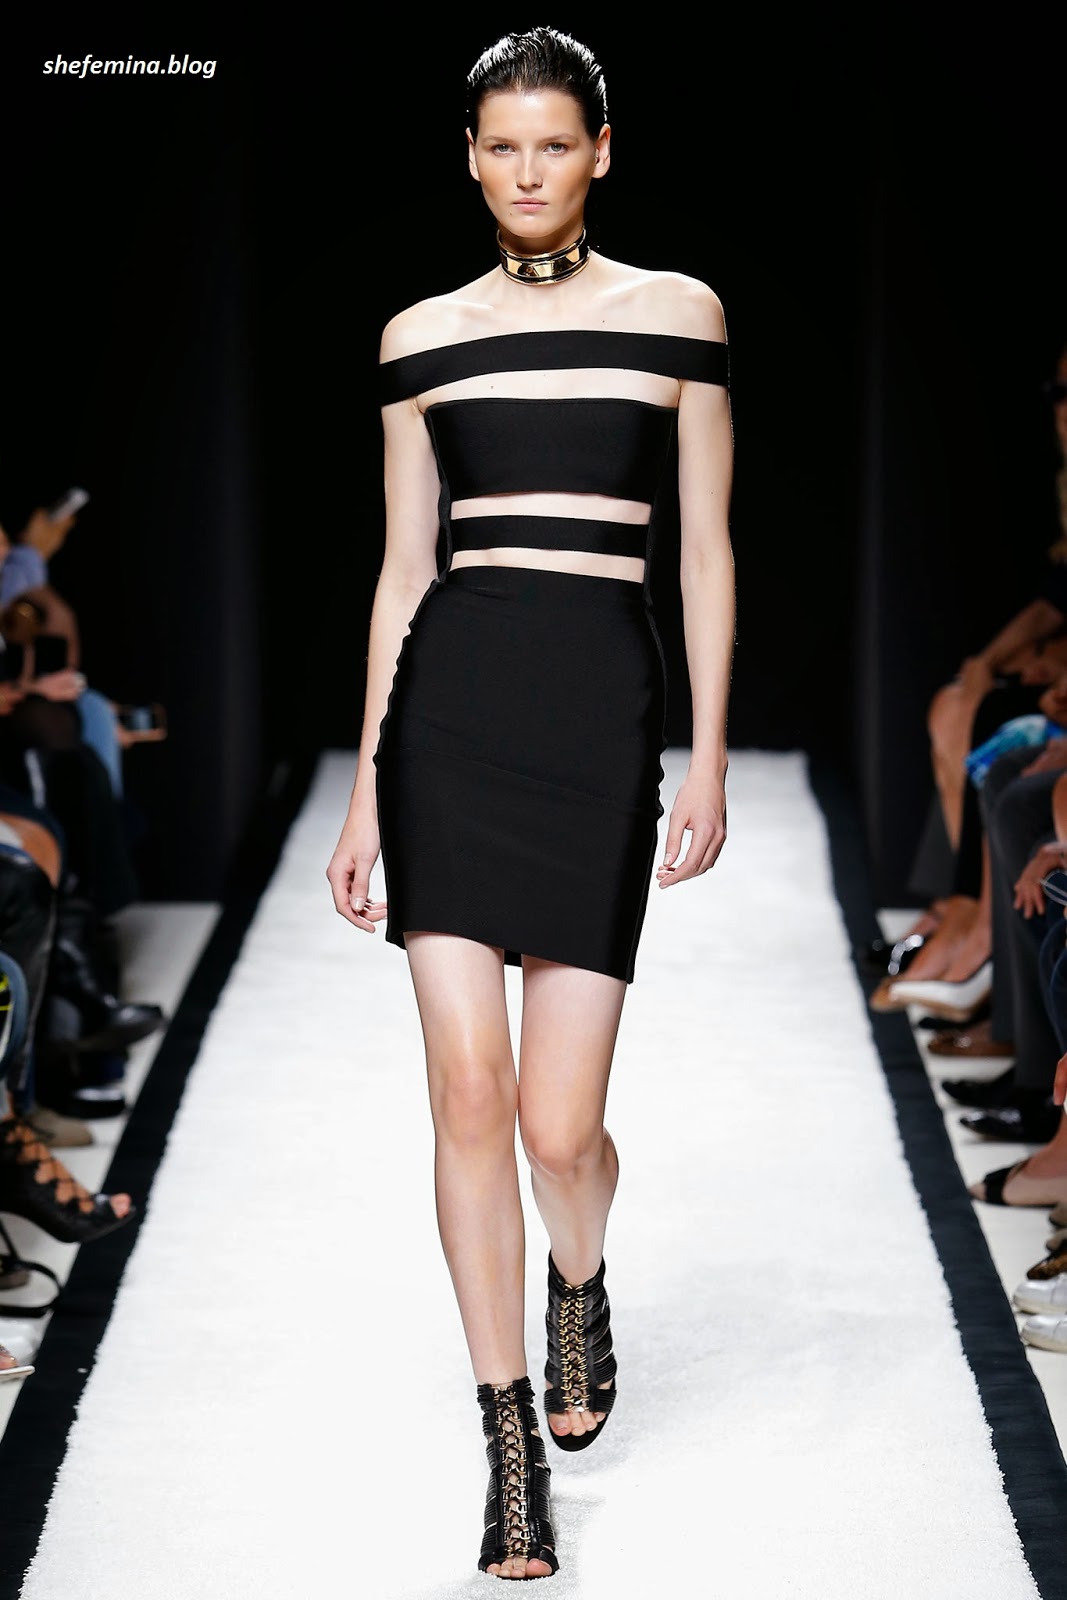 Balmain Spring 2015 Ready-to-Wear Dresses Collation at Fashioh Show